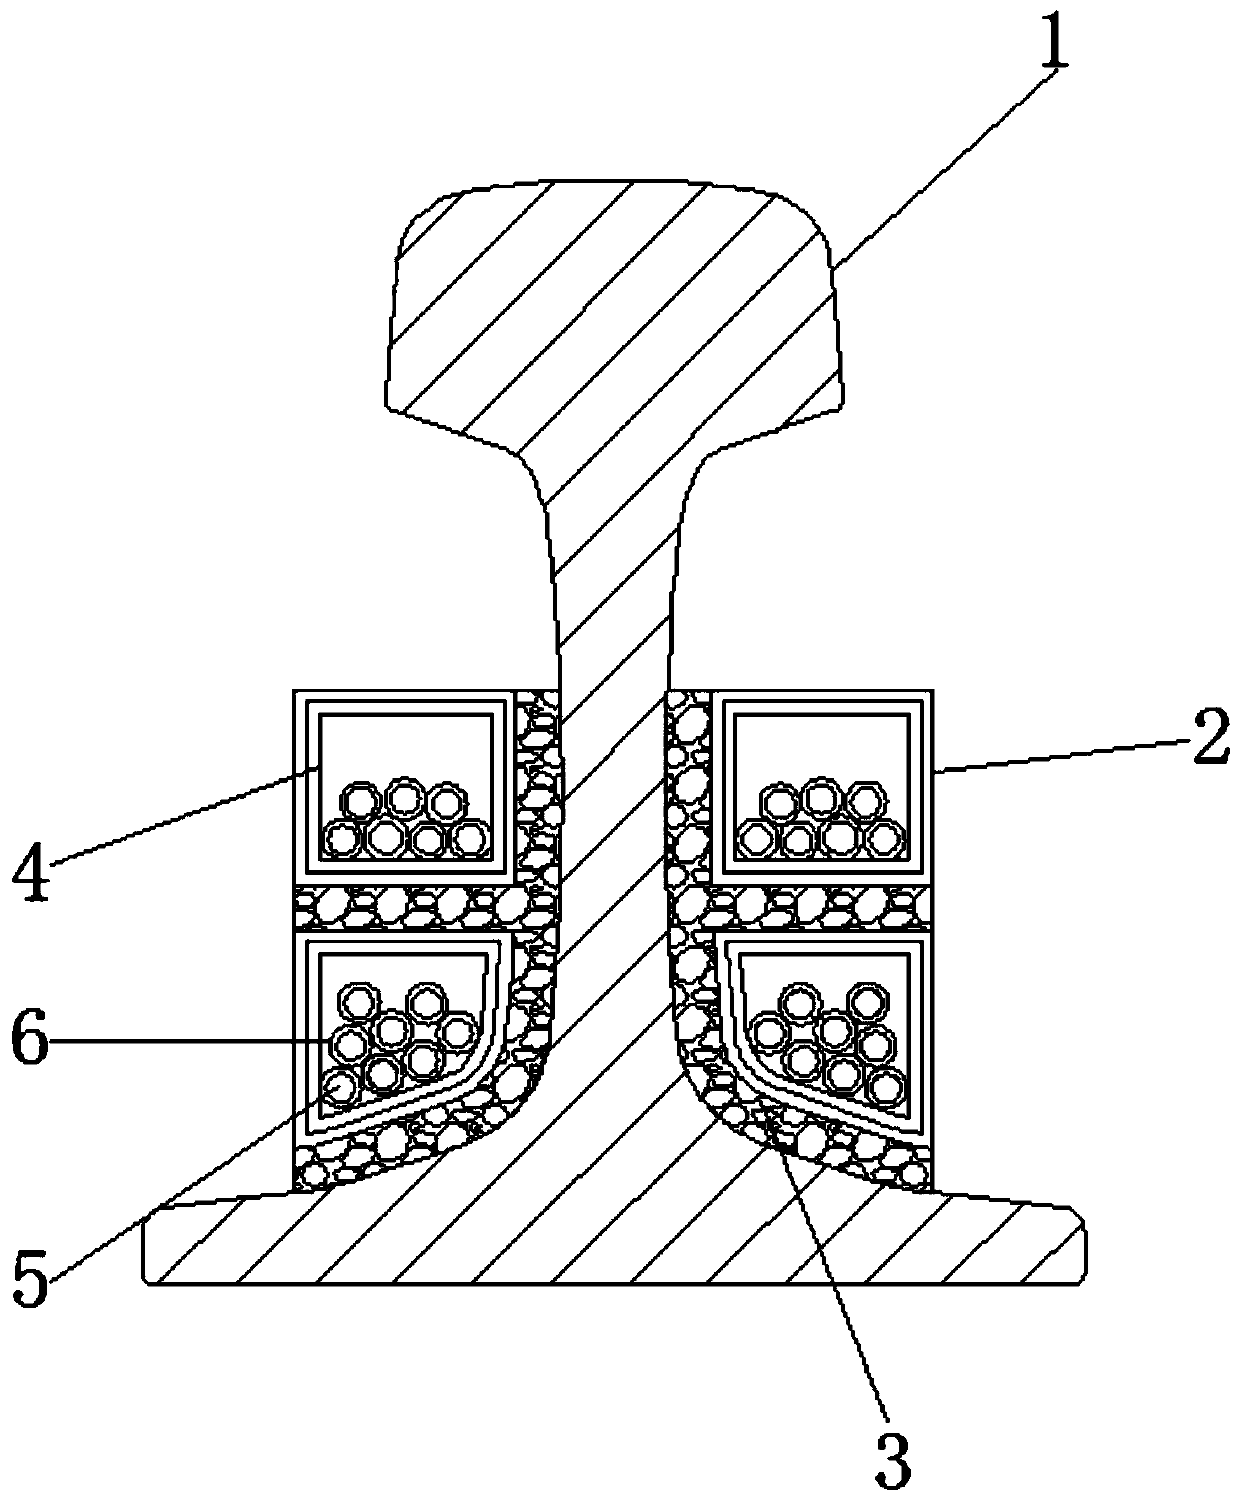 Device for suppressing vibration noise of steel rail